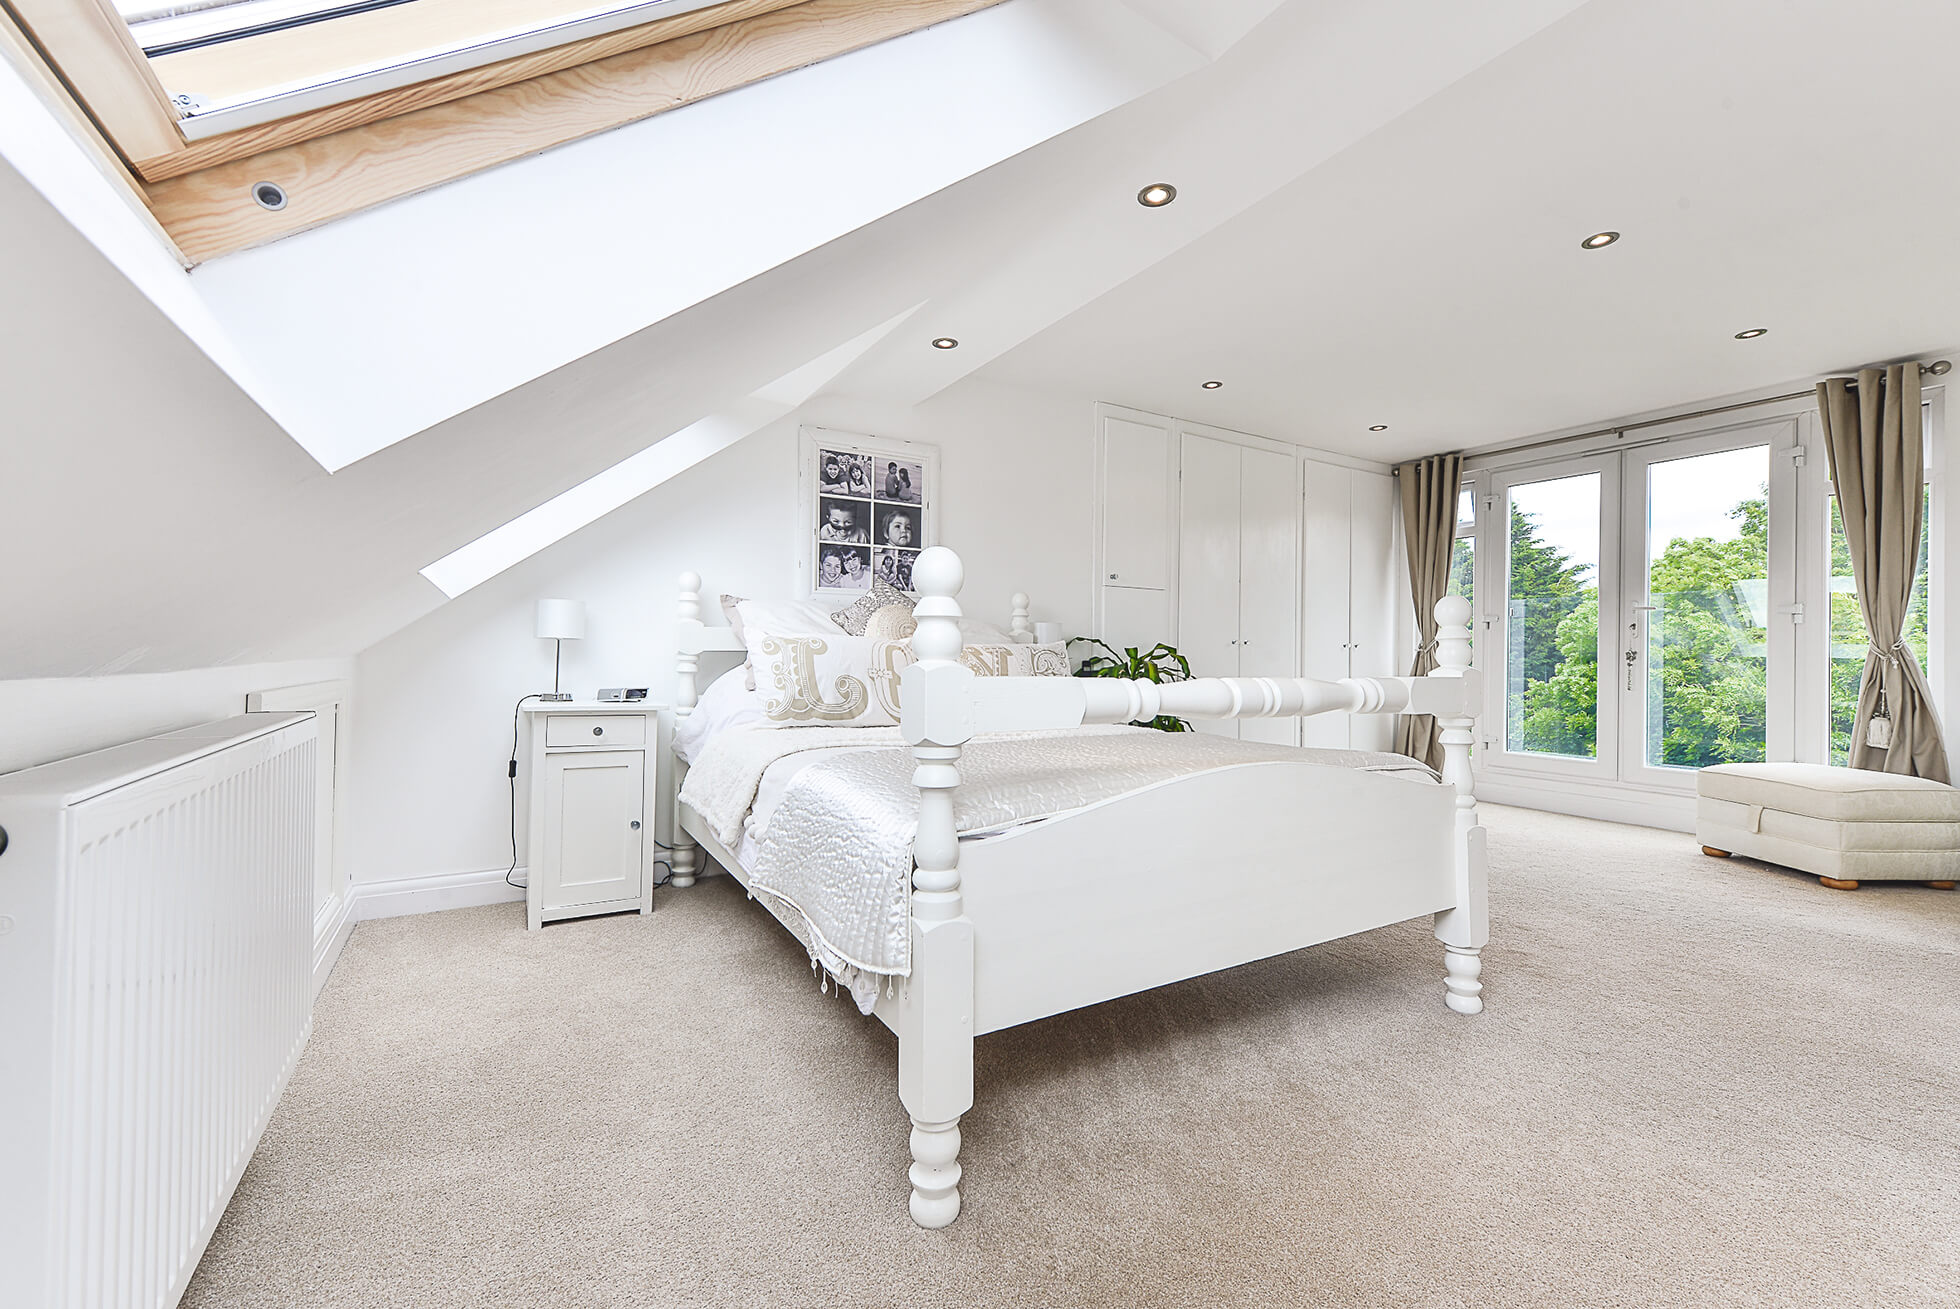 Do you have a question about converting your Loft in Hinxworth? Here are the most popular questions asked by our clients.